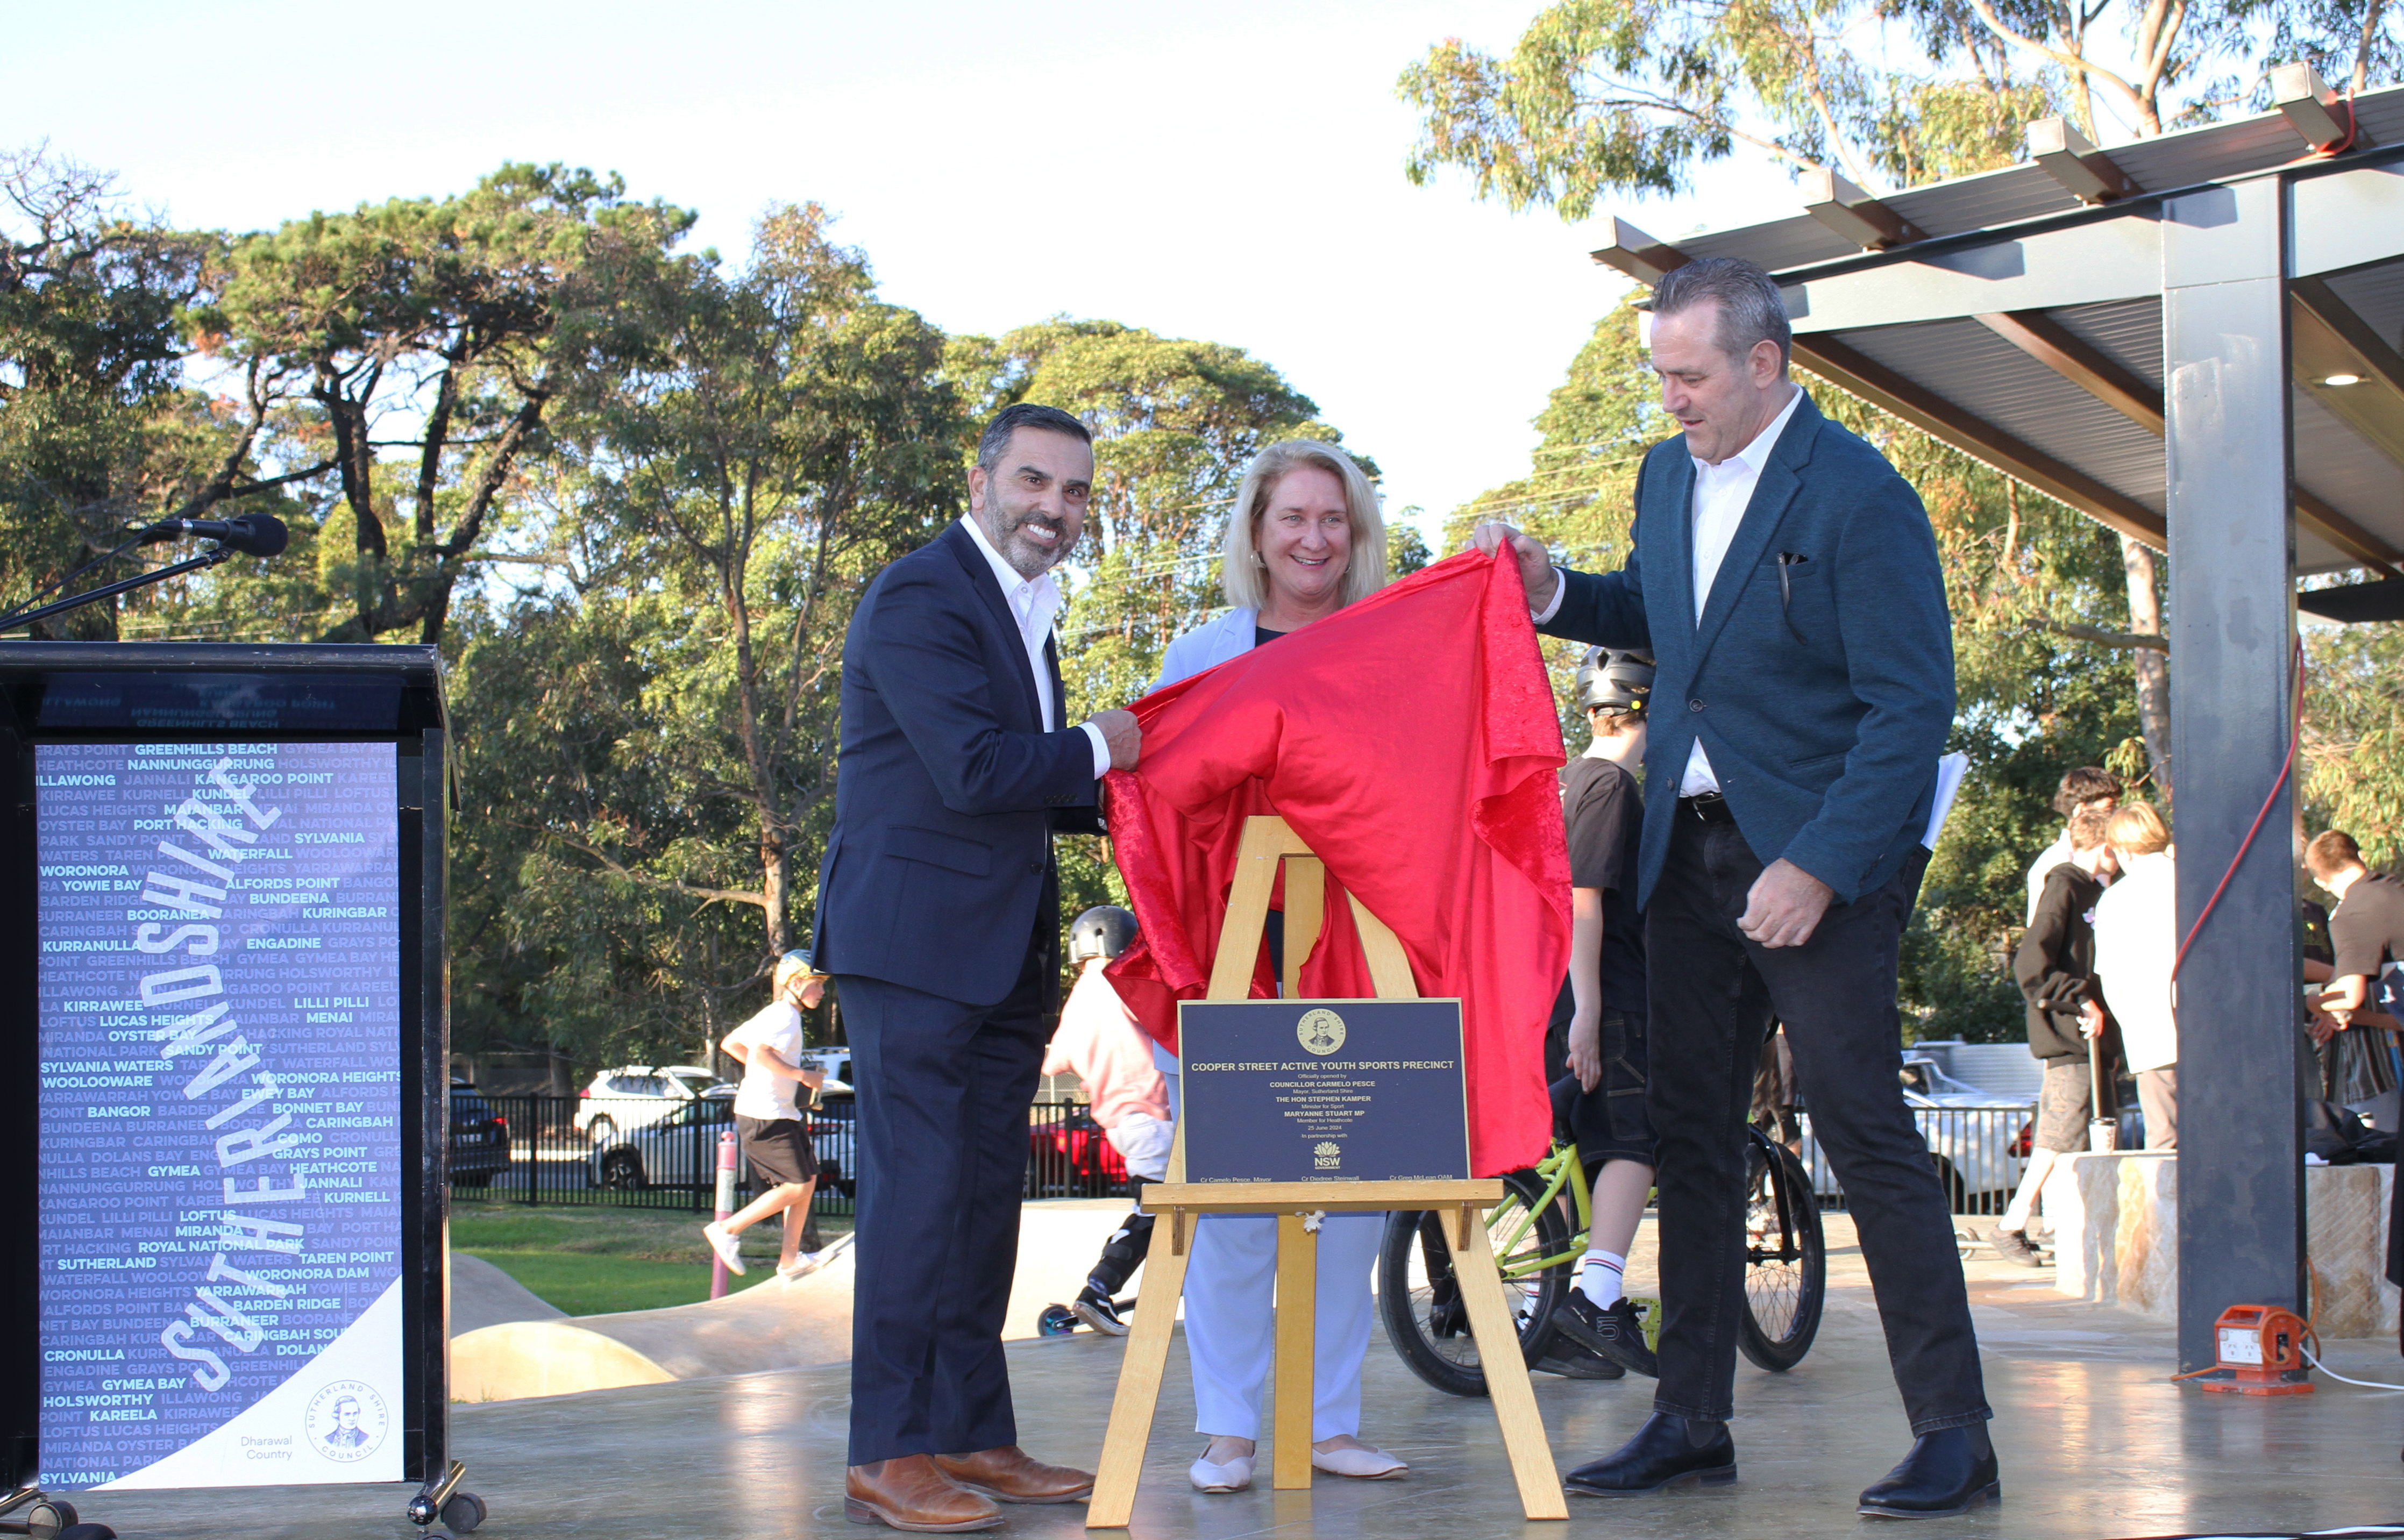 Sutherland Shire Mayor Councillor Carmelo Pesce, Member for Heathcote Maryanne Stuart, and Minister for Sport Steve Kamper revealing the plaque at the Cooper Street Active Youth Sports Precinct official opening